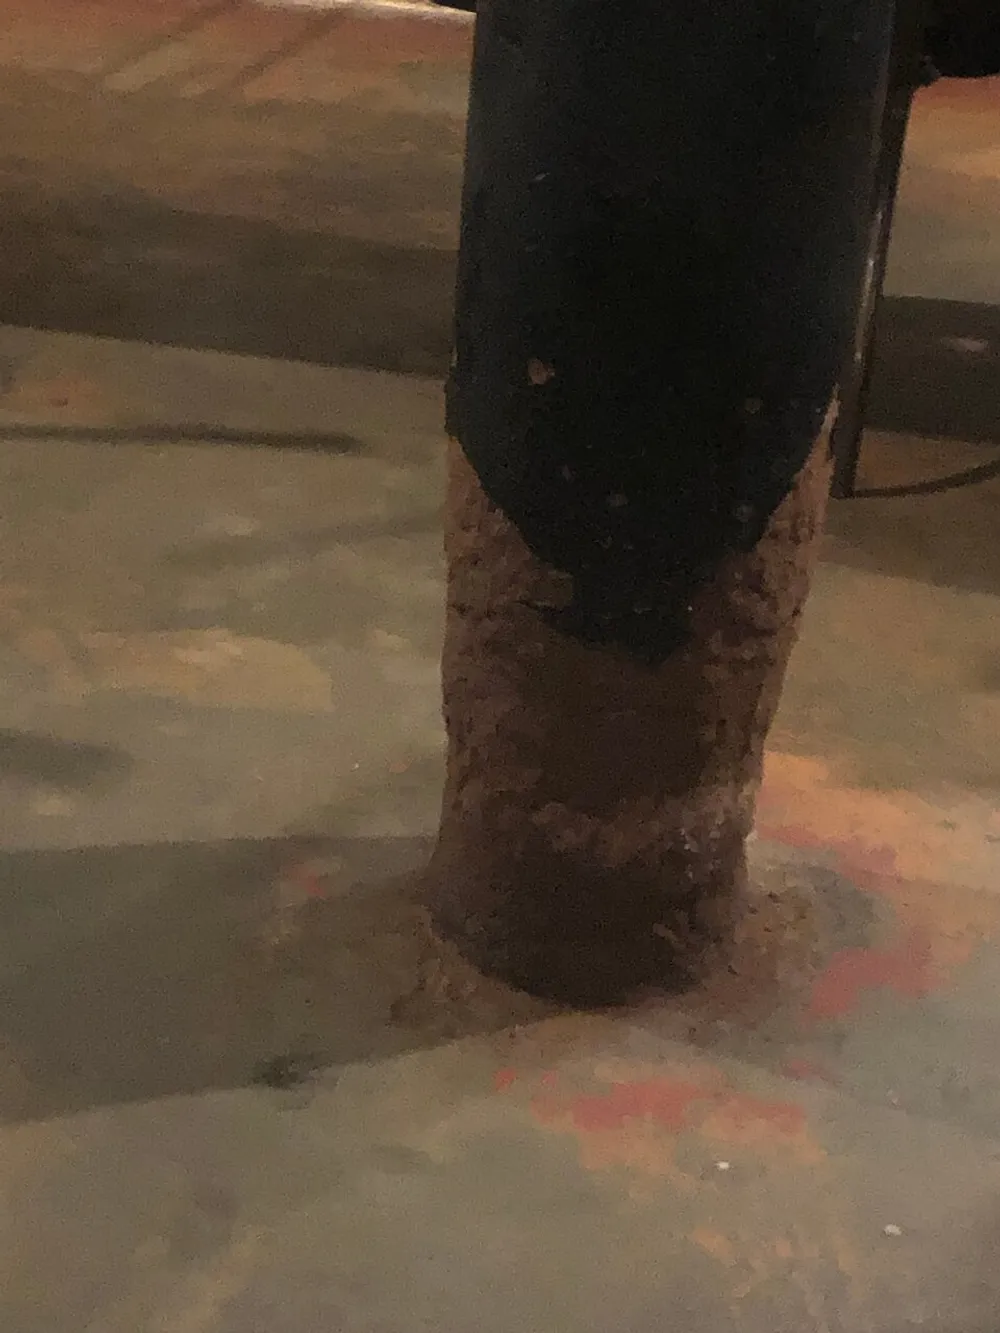 The image depicts a corroded metal pole with visible rust at the base where it meets a concrete floor